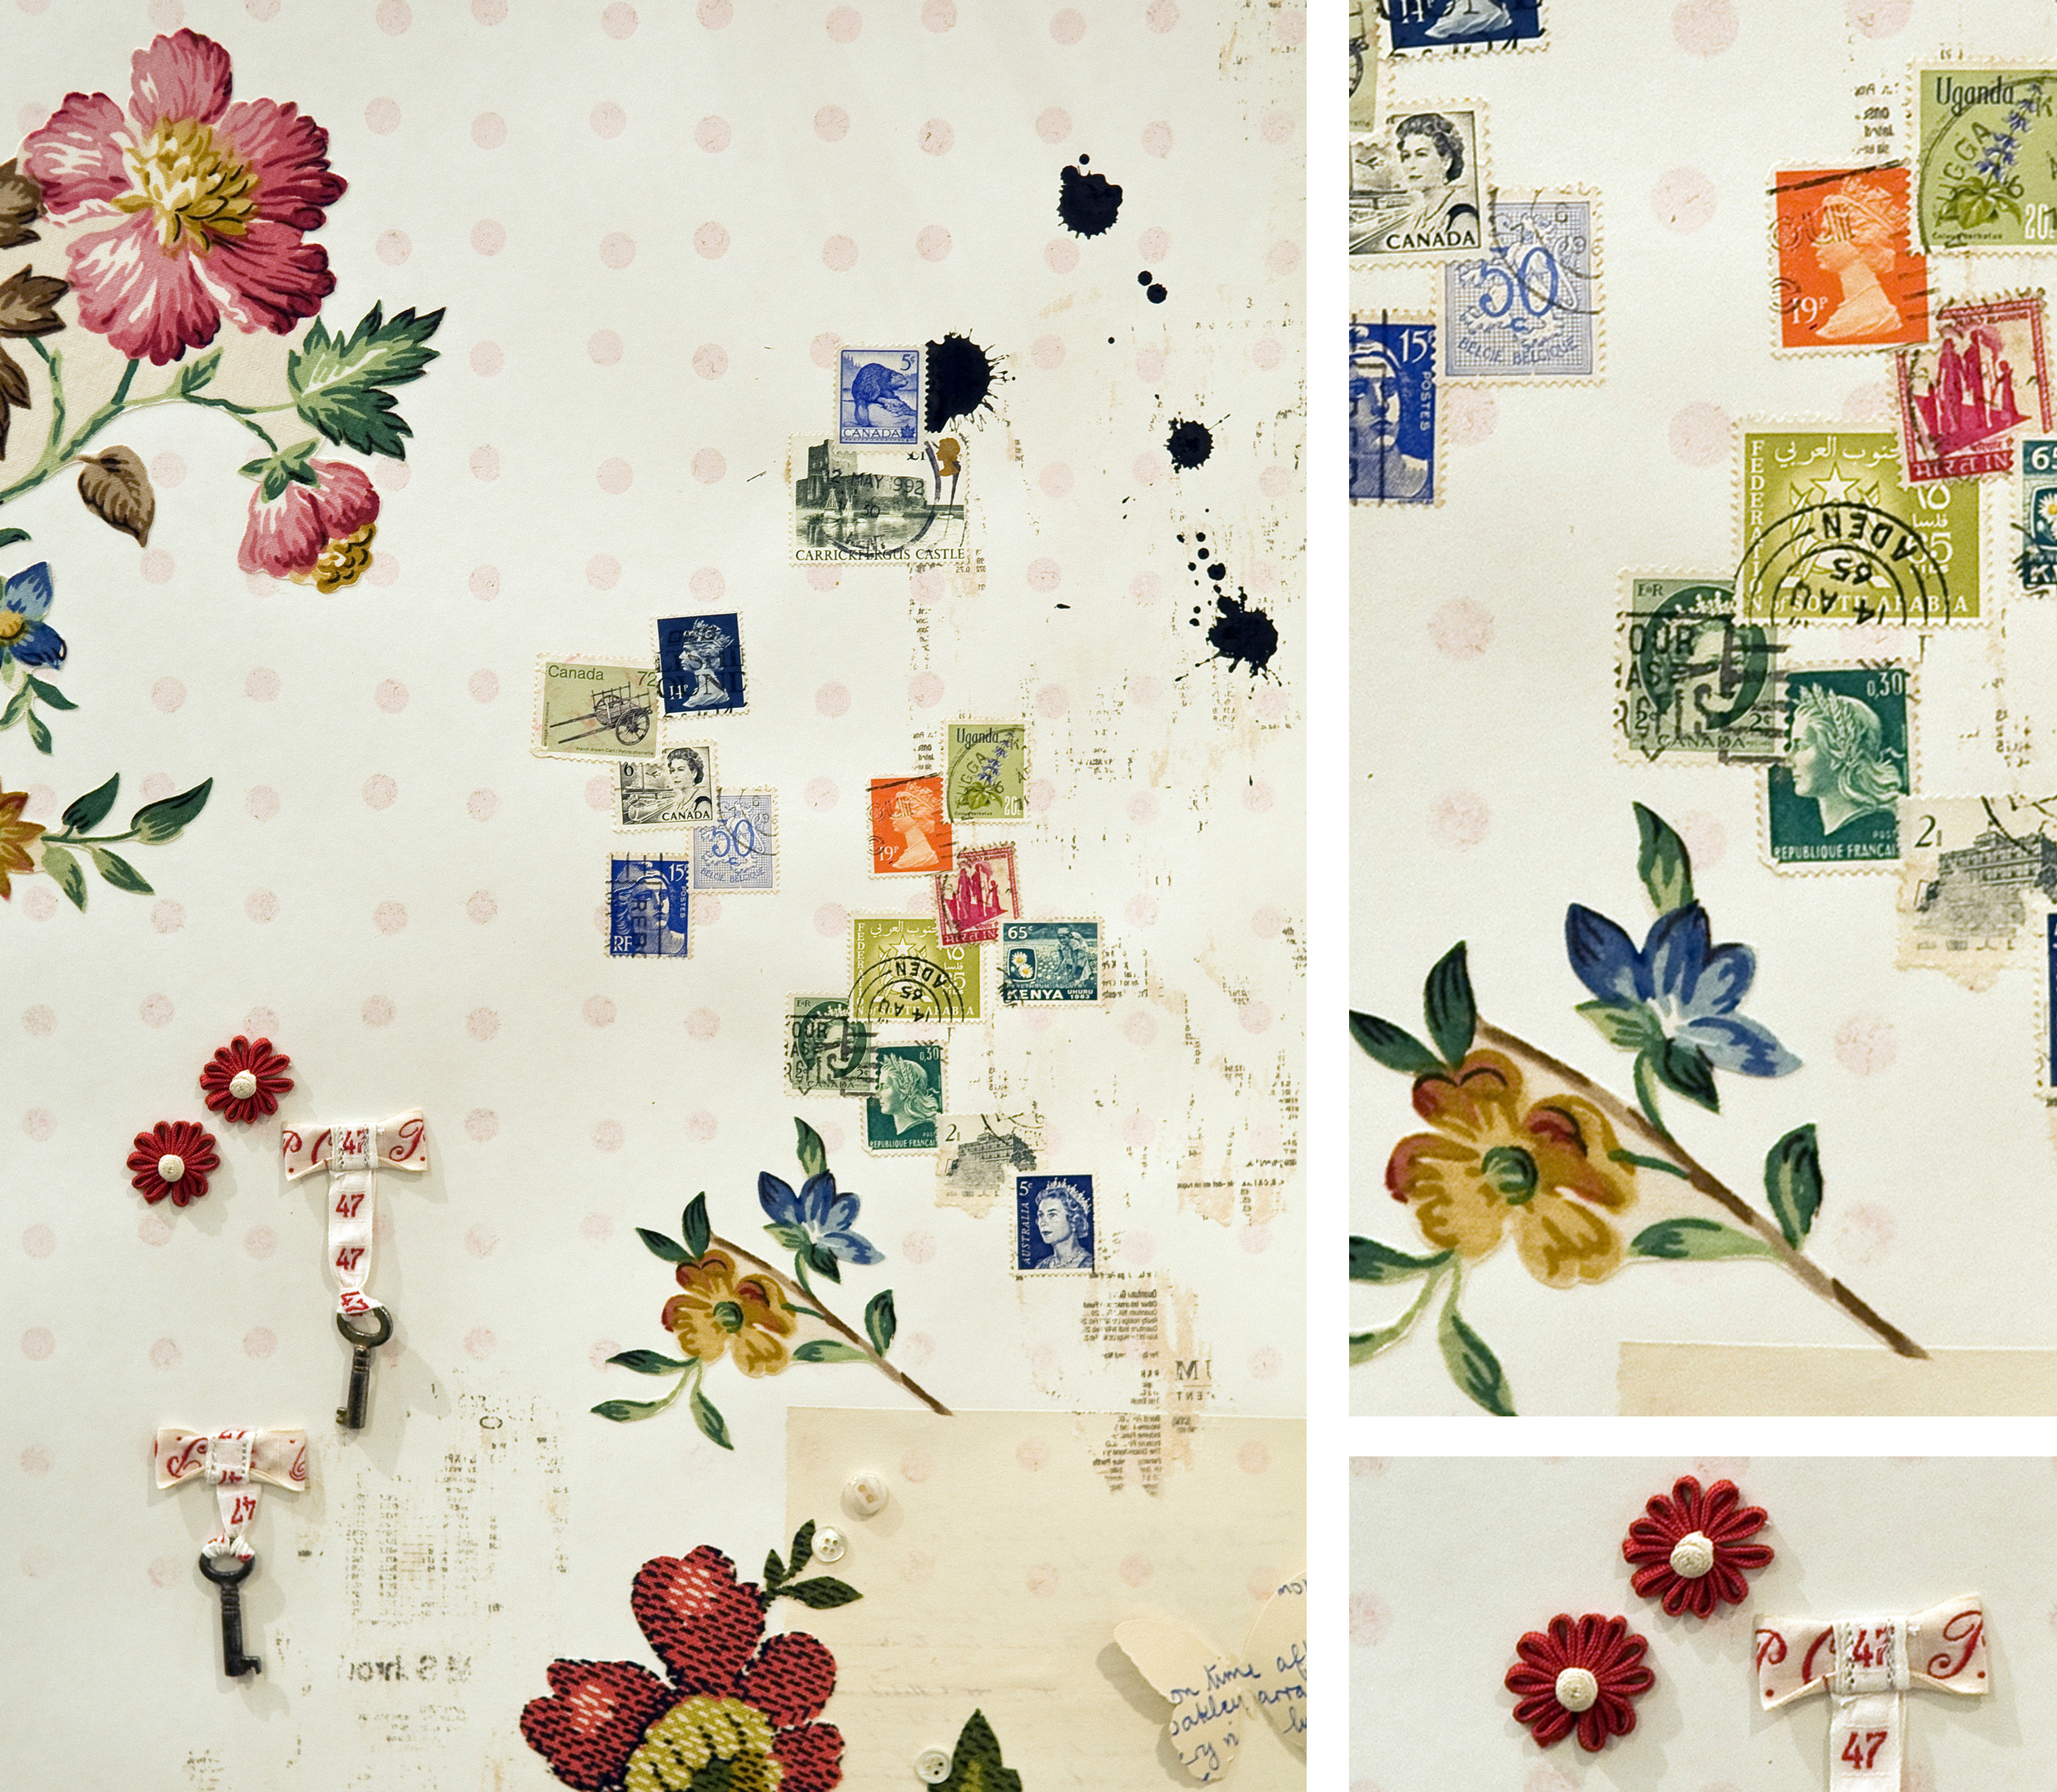  at her beautiful bespoke wallpapers and fabrics with postage stamps, 